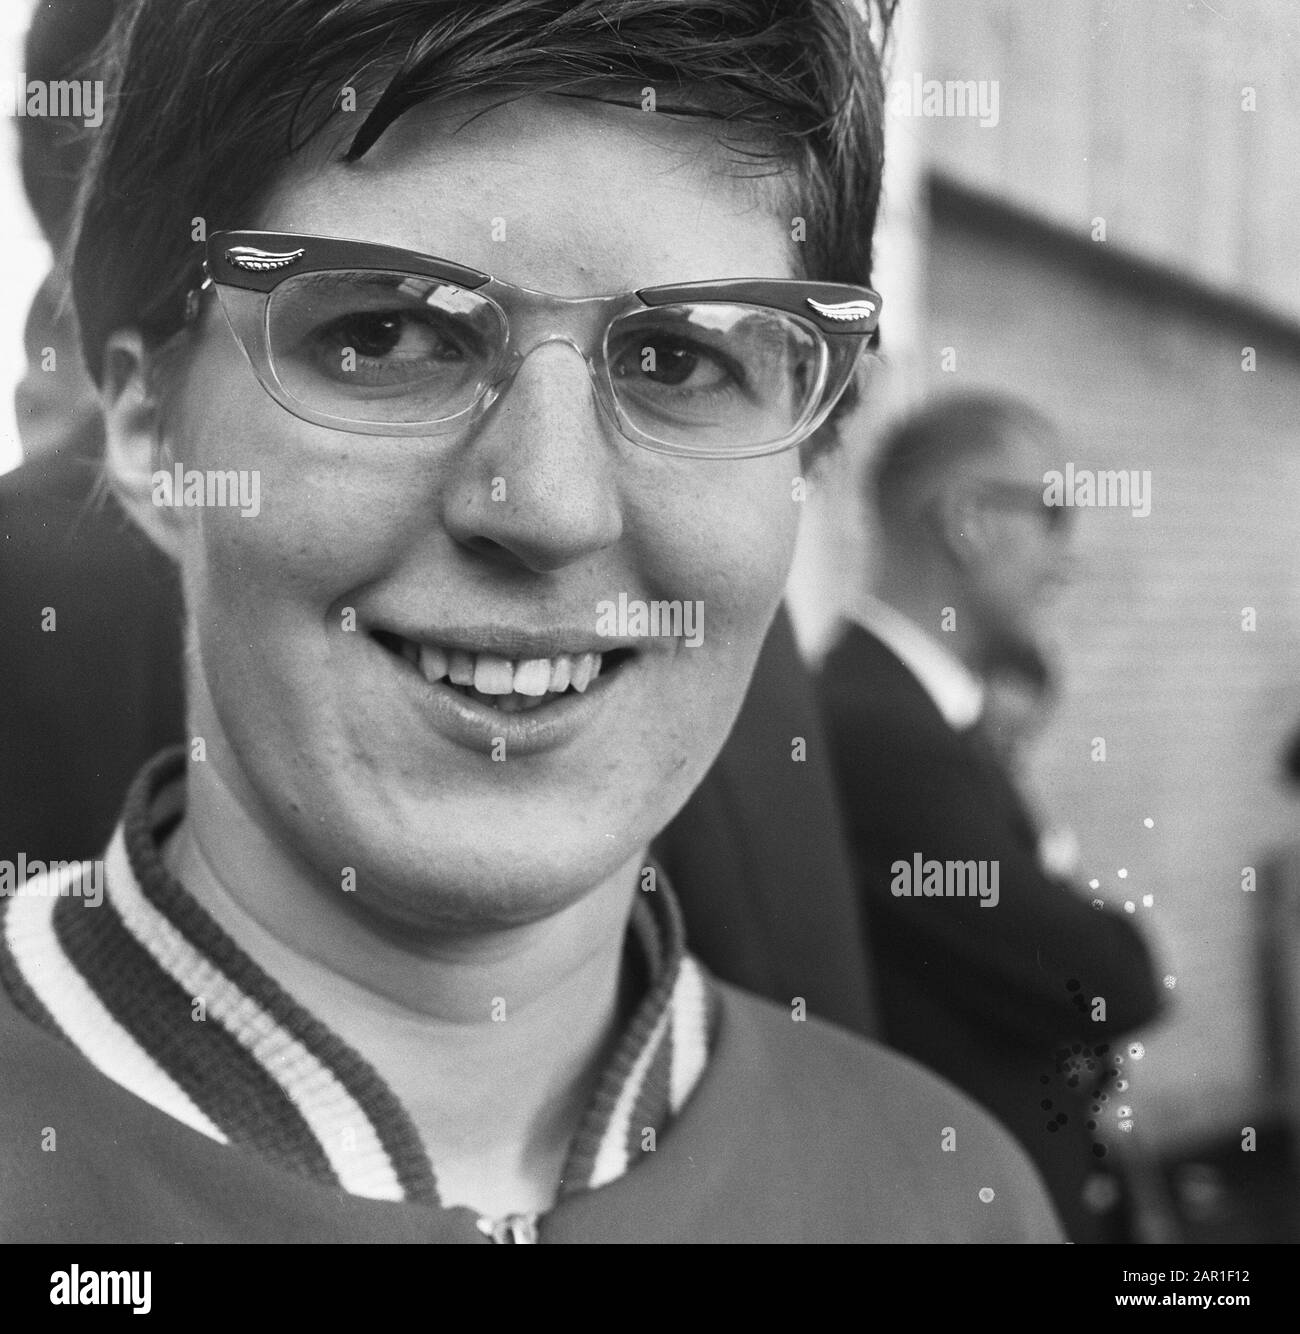 Swimming championships at Emmen, Coby Buter (head) 100 with backstroke Date: August 8, 1965 Location: Emmen Keywords: HEADS, Championships, swimmers Personal name: coby buter Stock Photo